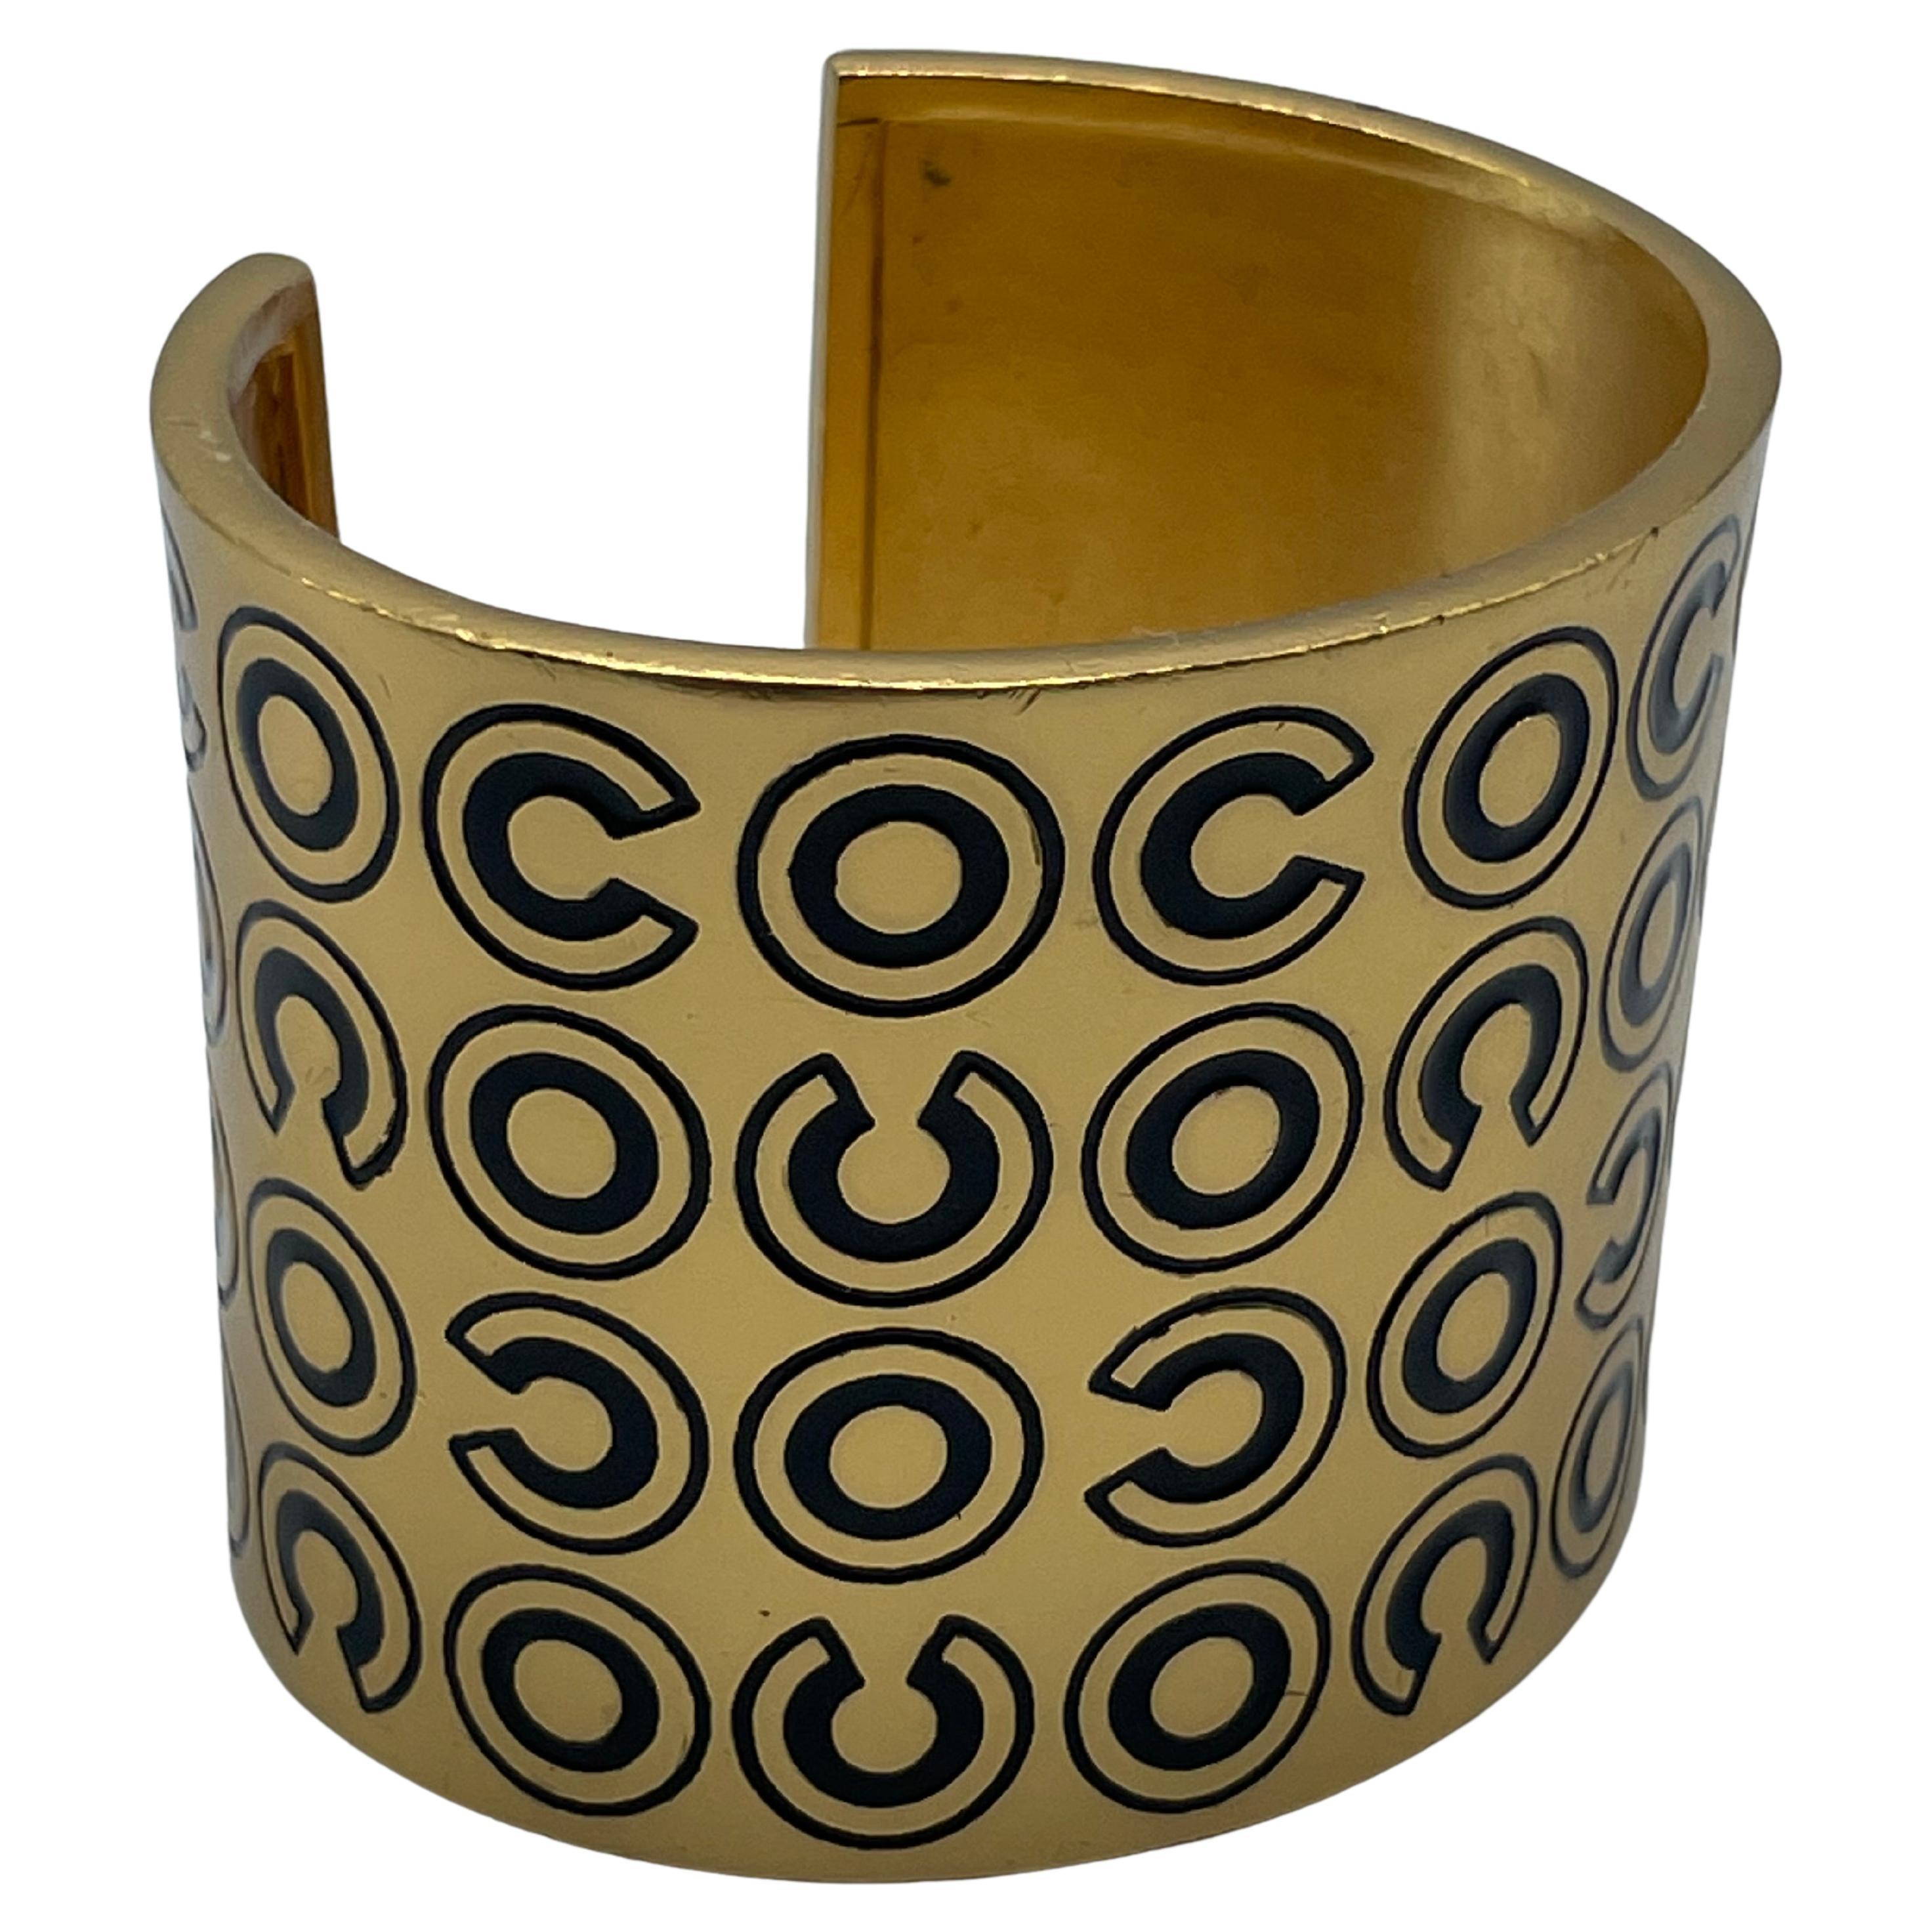 aprococo - CHANEL HAND MADE 80's Quilted GOLD CHANEL Cuff Bracelet